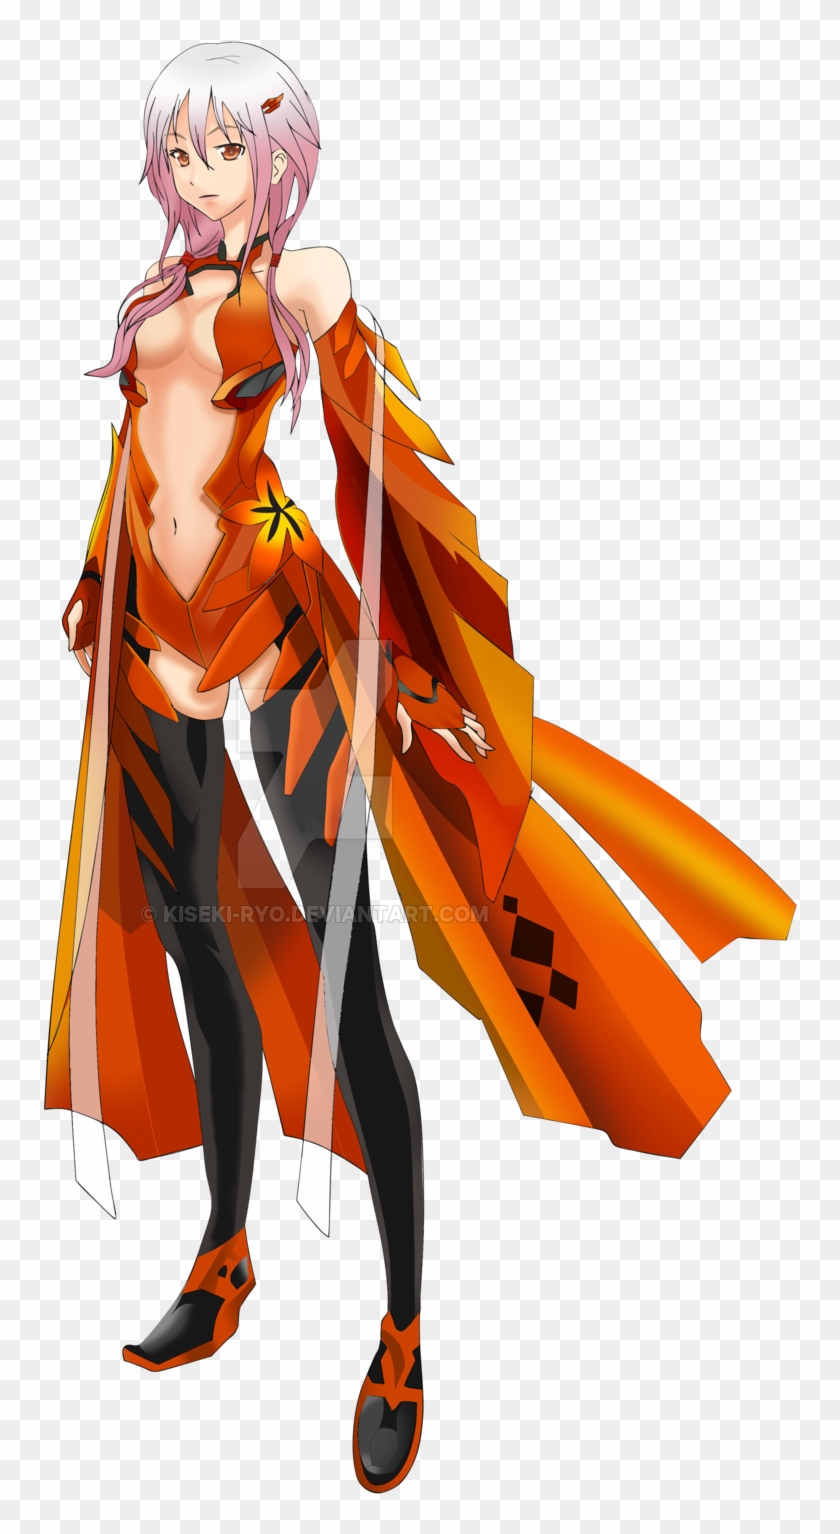 Guilty Crown Png Image - Guilty Crown Inori Character Design Clipart #85310